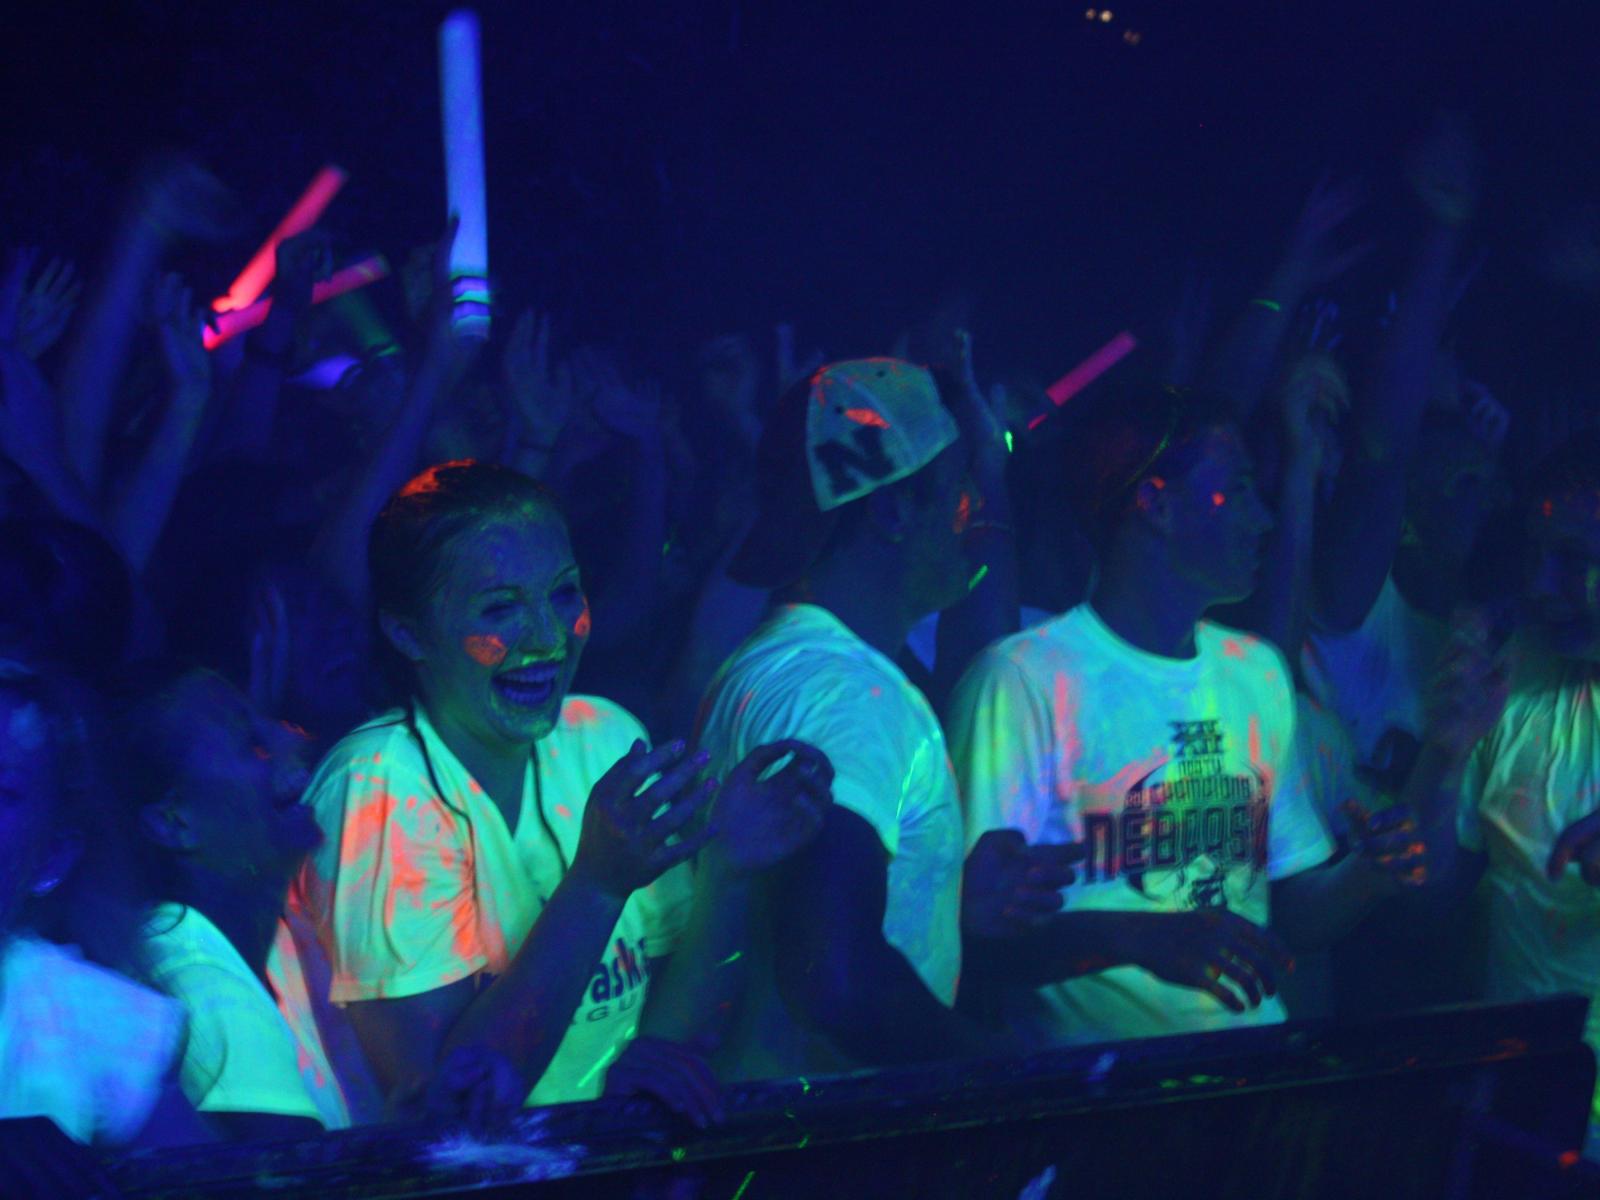 University of Nebraska-Lincoln students dance and enjoy a paint party in the heart of campus